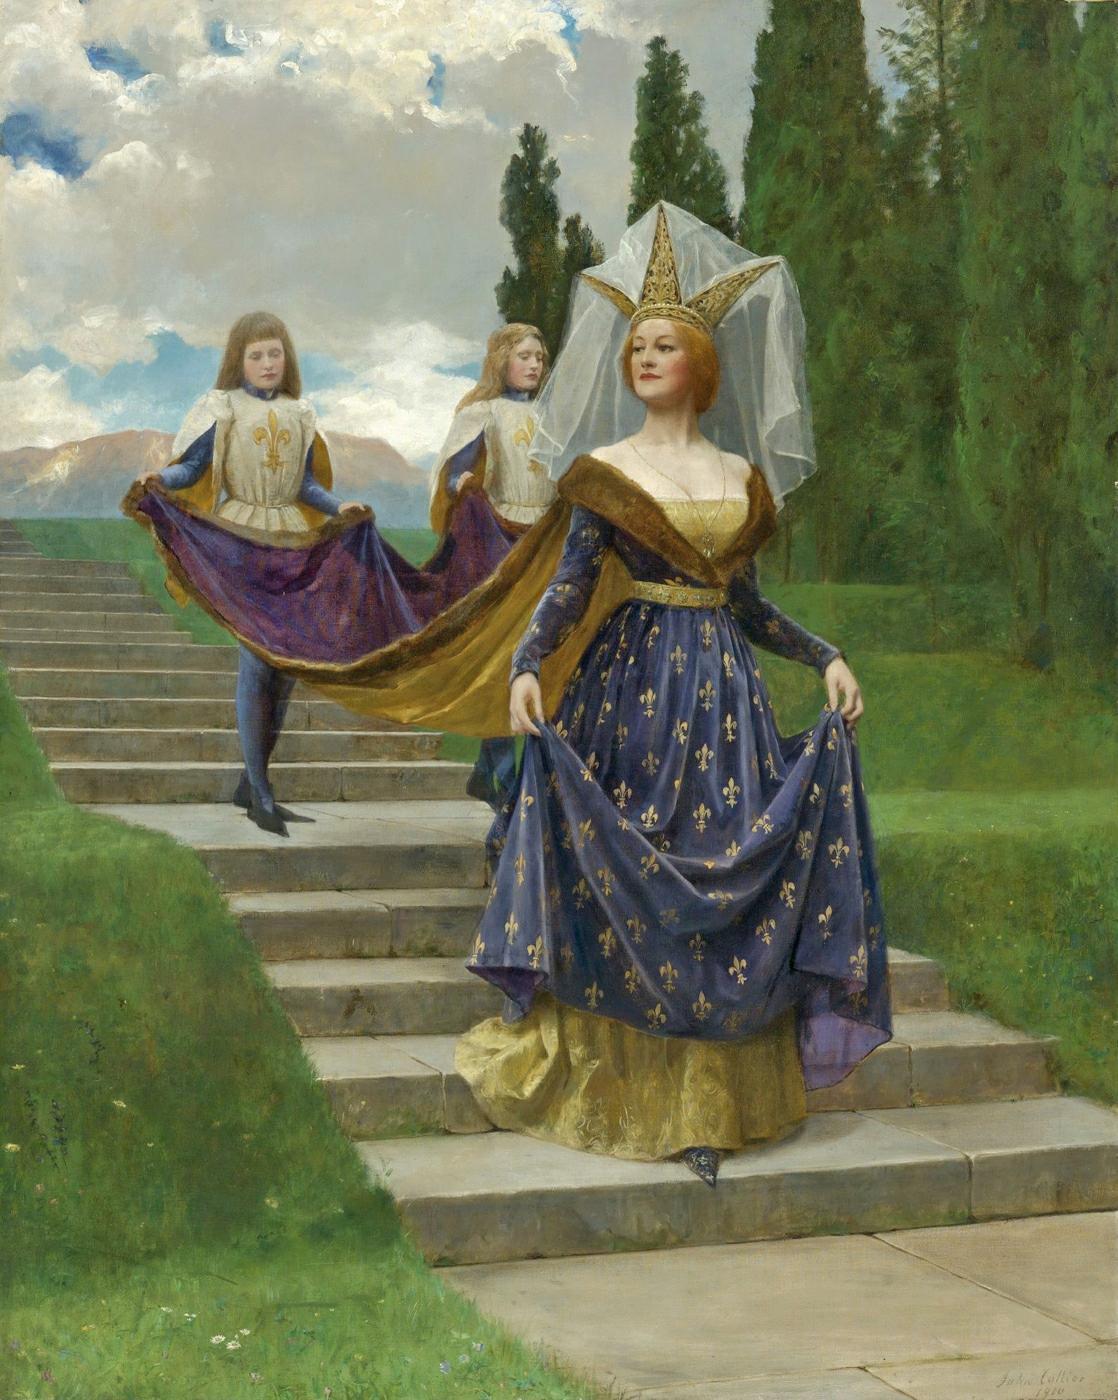 a painting shows an elaborate gown, and three s with a gold crown and long dress sitting on stairs